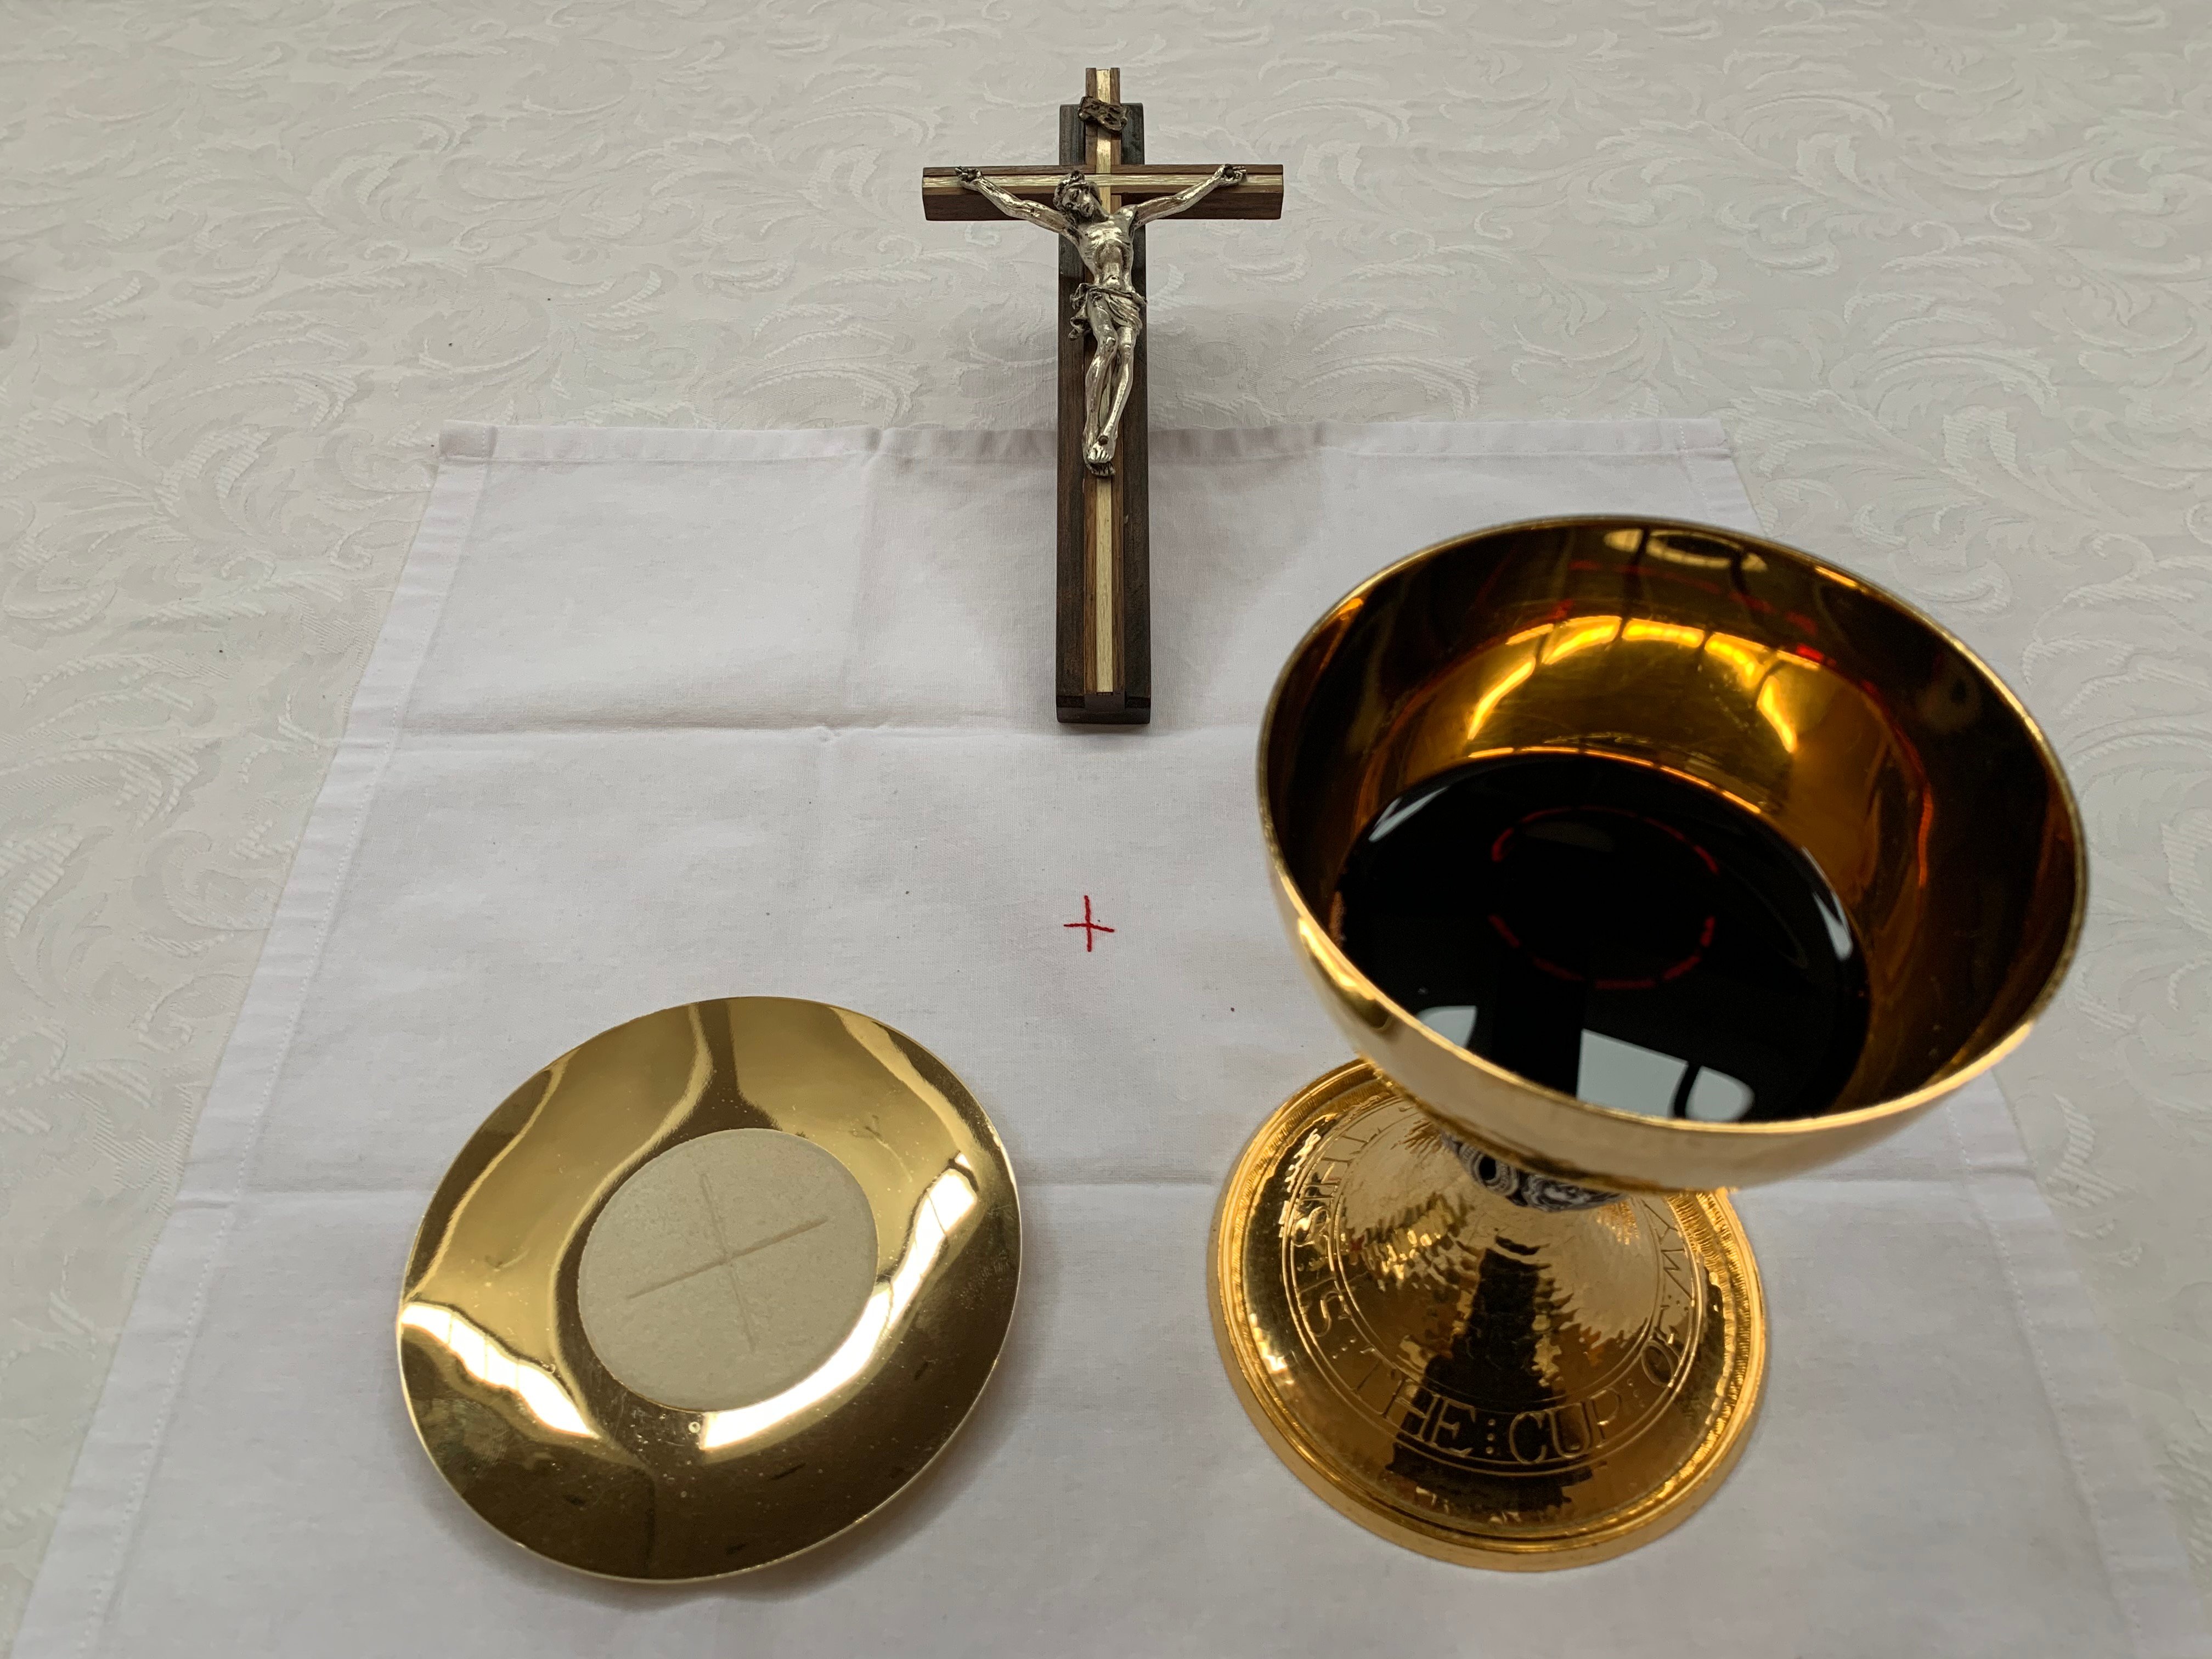 A paten with a host, a chalice with wine and a crucifix